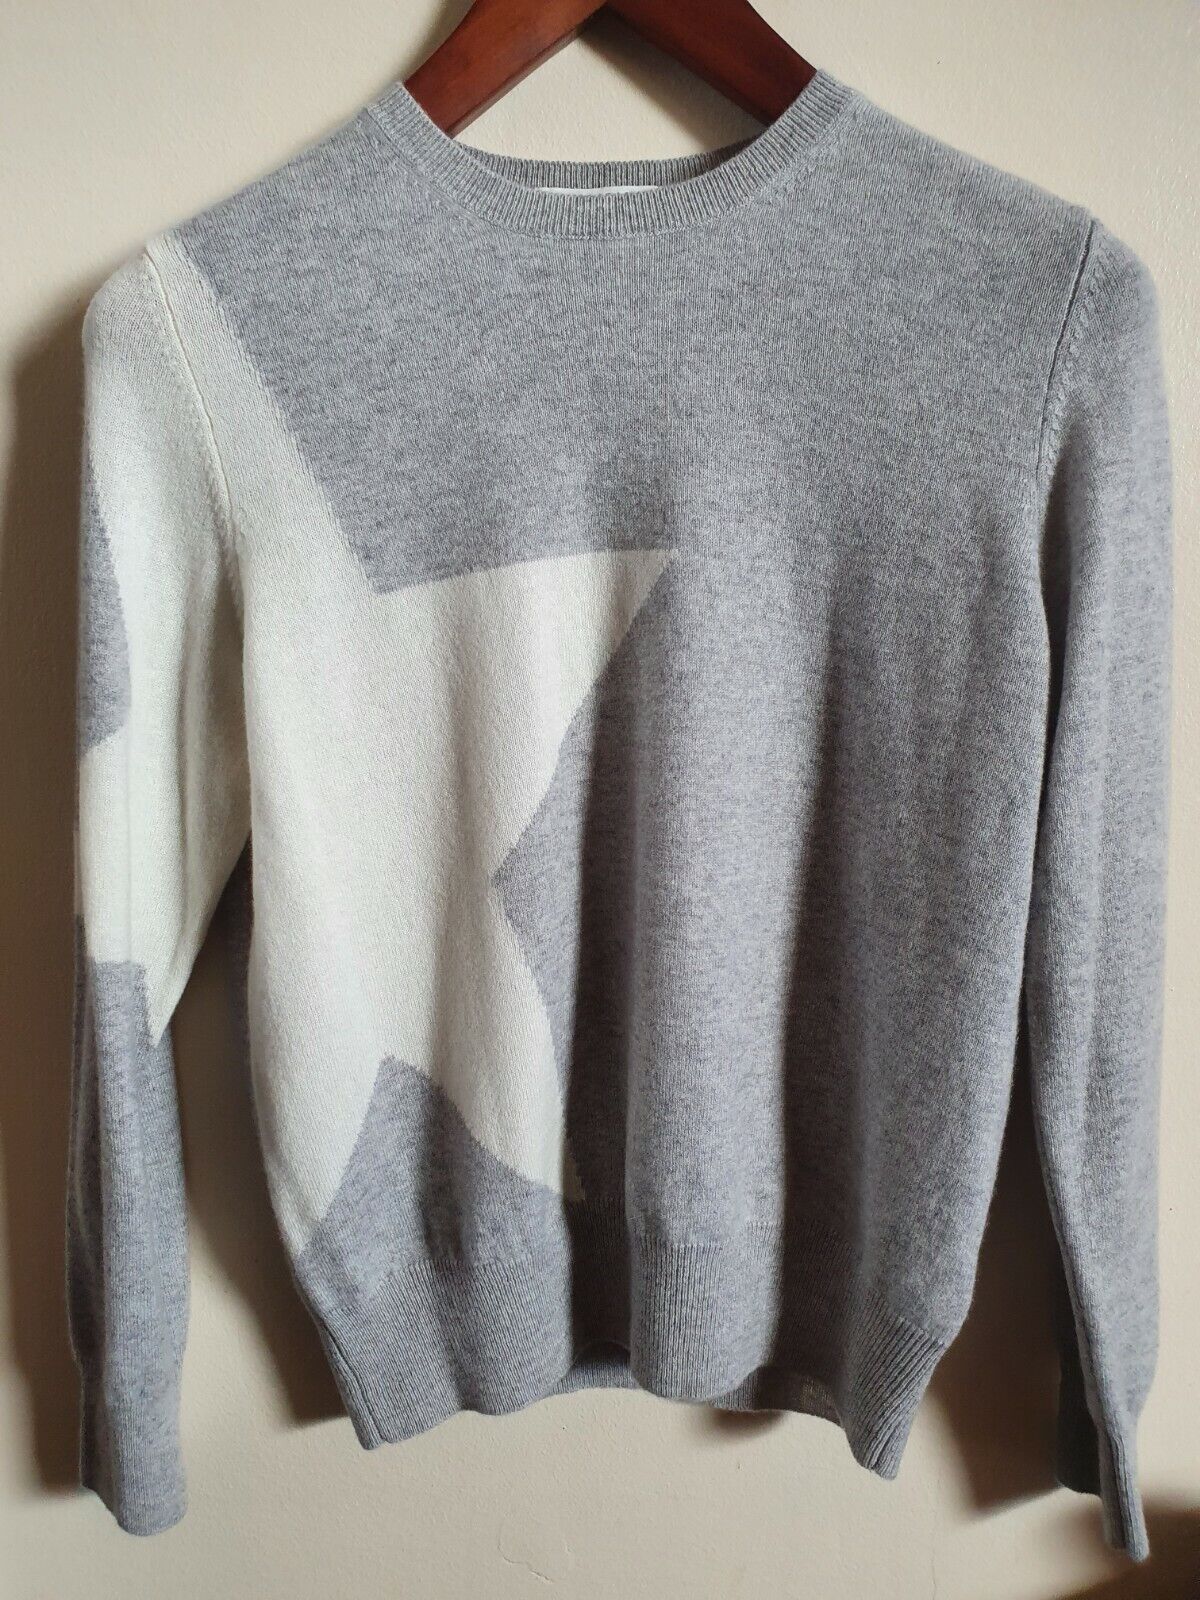 Marks and Spencer NEW Pure Cashmere Star Crew Neck Jumper size 14 Grey mix